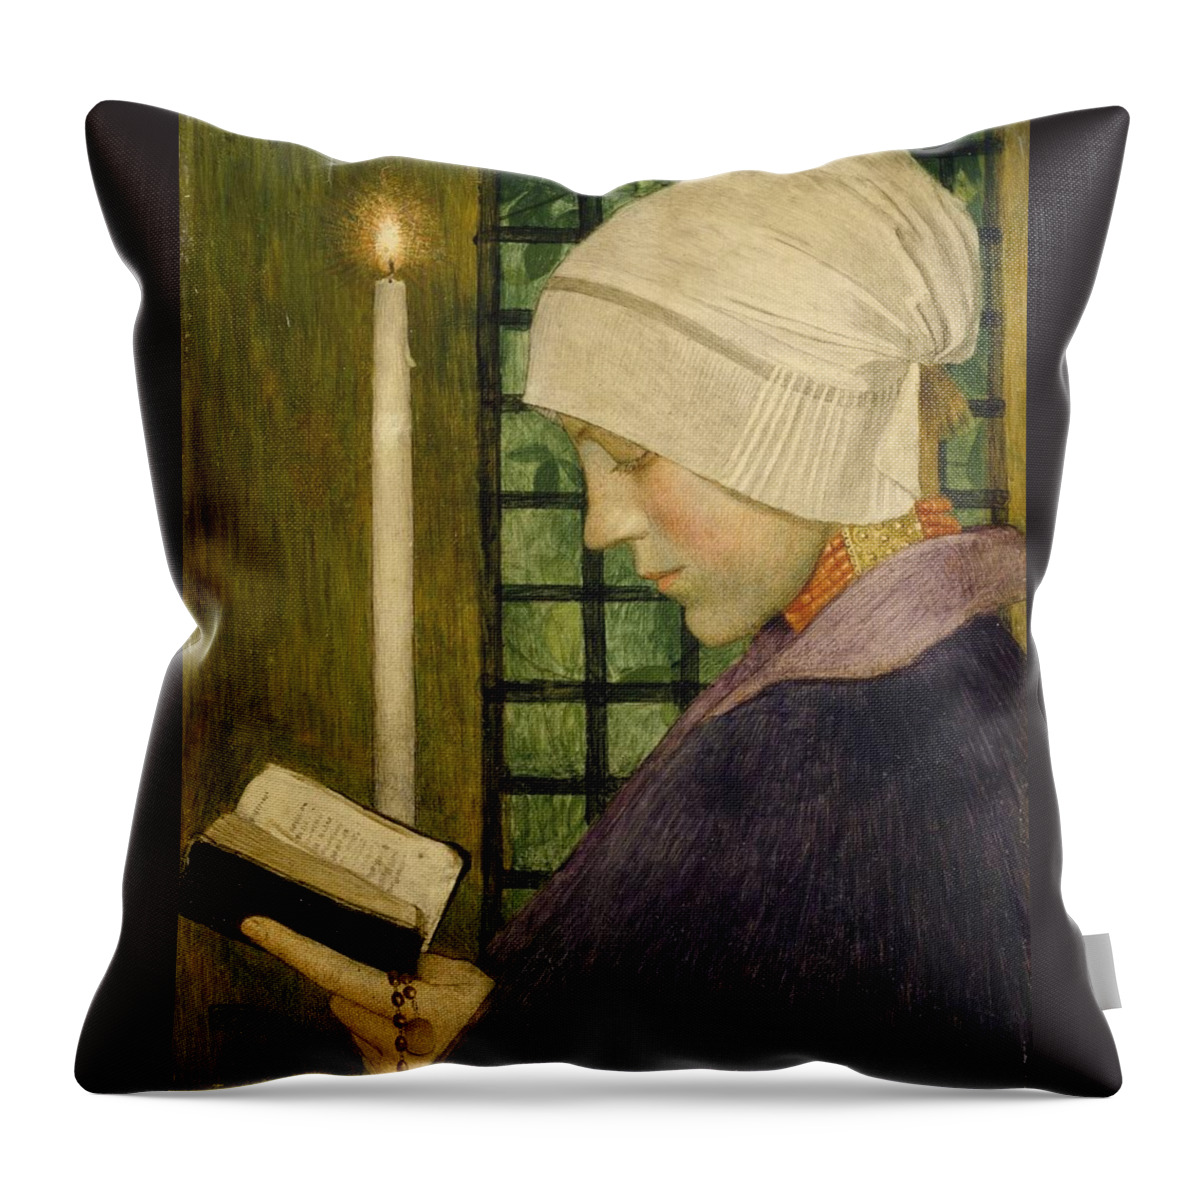 Marianne Stokes - Candlemas Day Throw Pillow featuring the painting Candlemas Day by MotionAge Designs